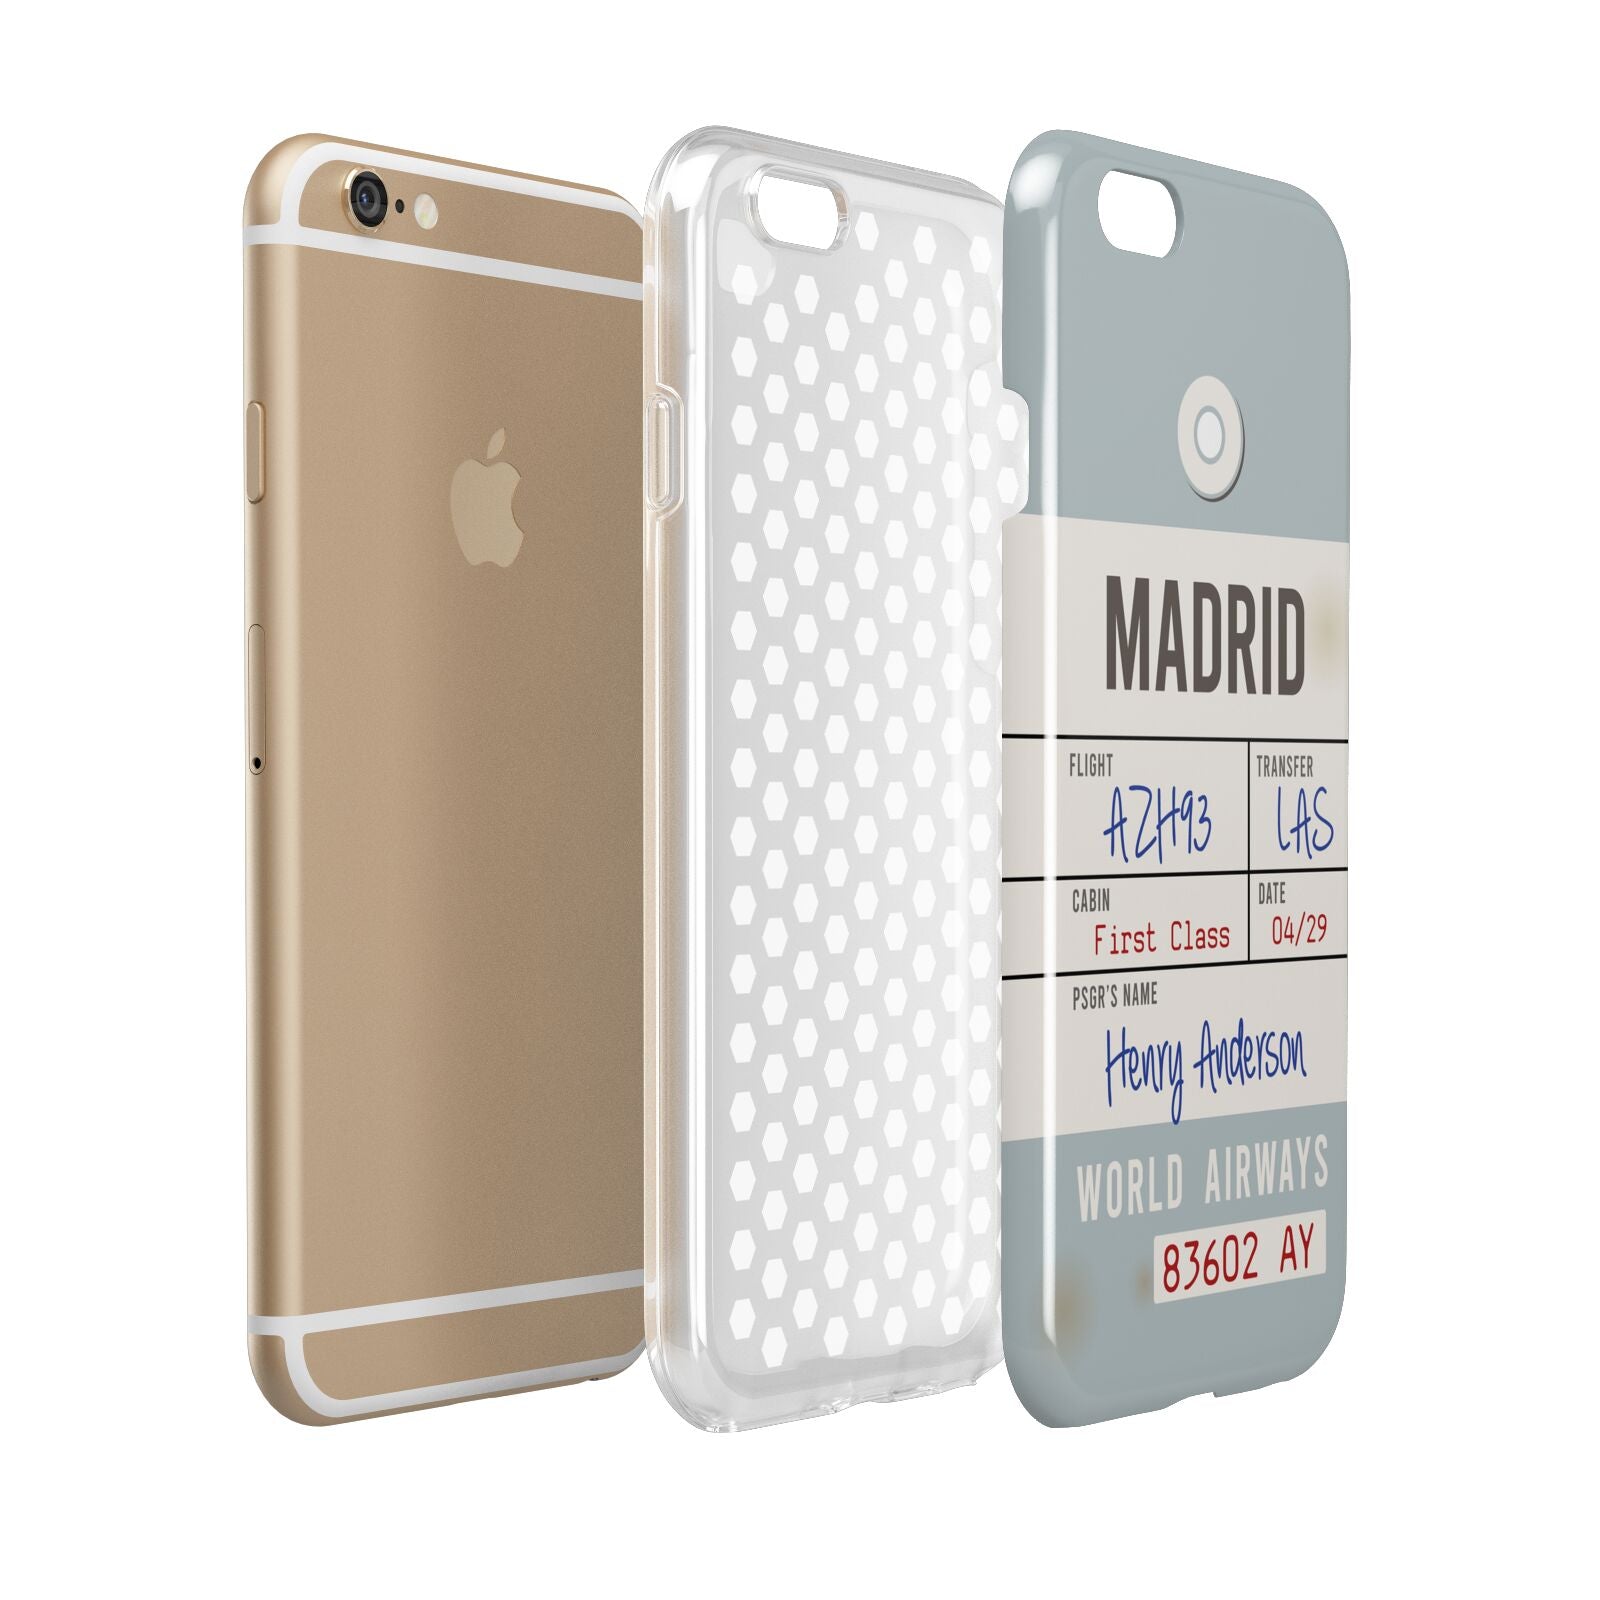 Baggage Tag Apple iPhone 6 3D Tough Case Expanded view